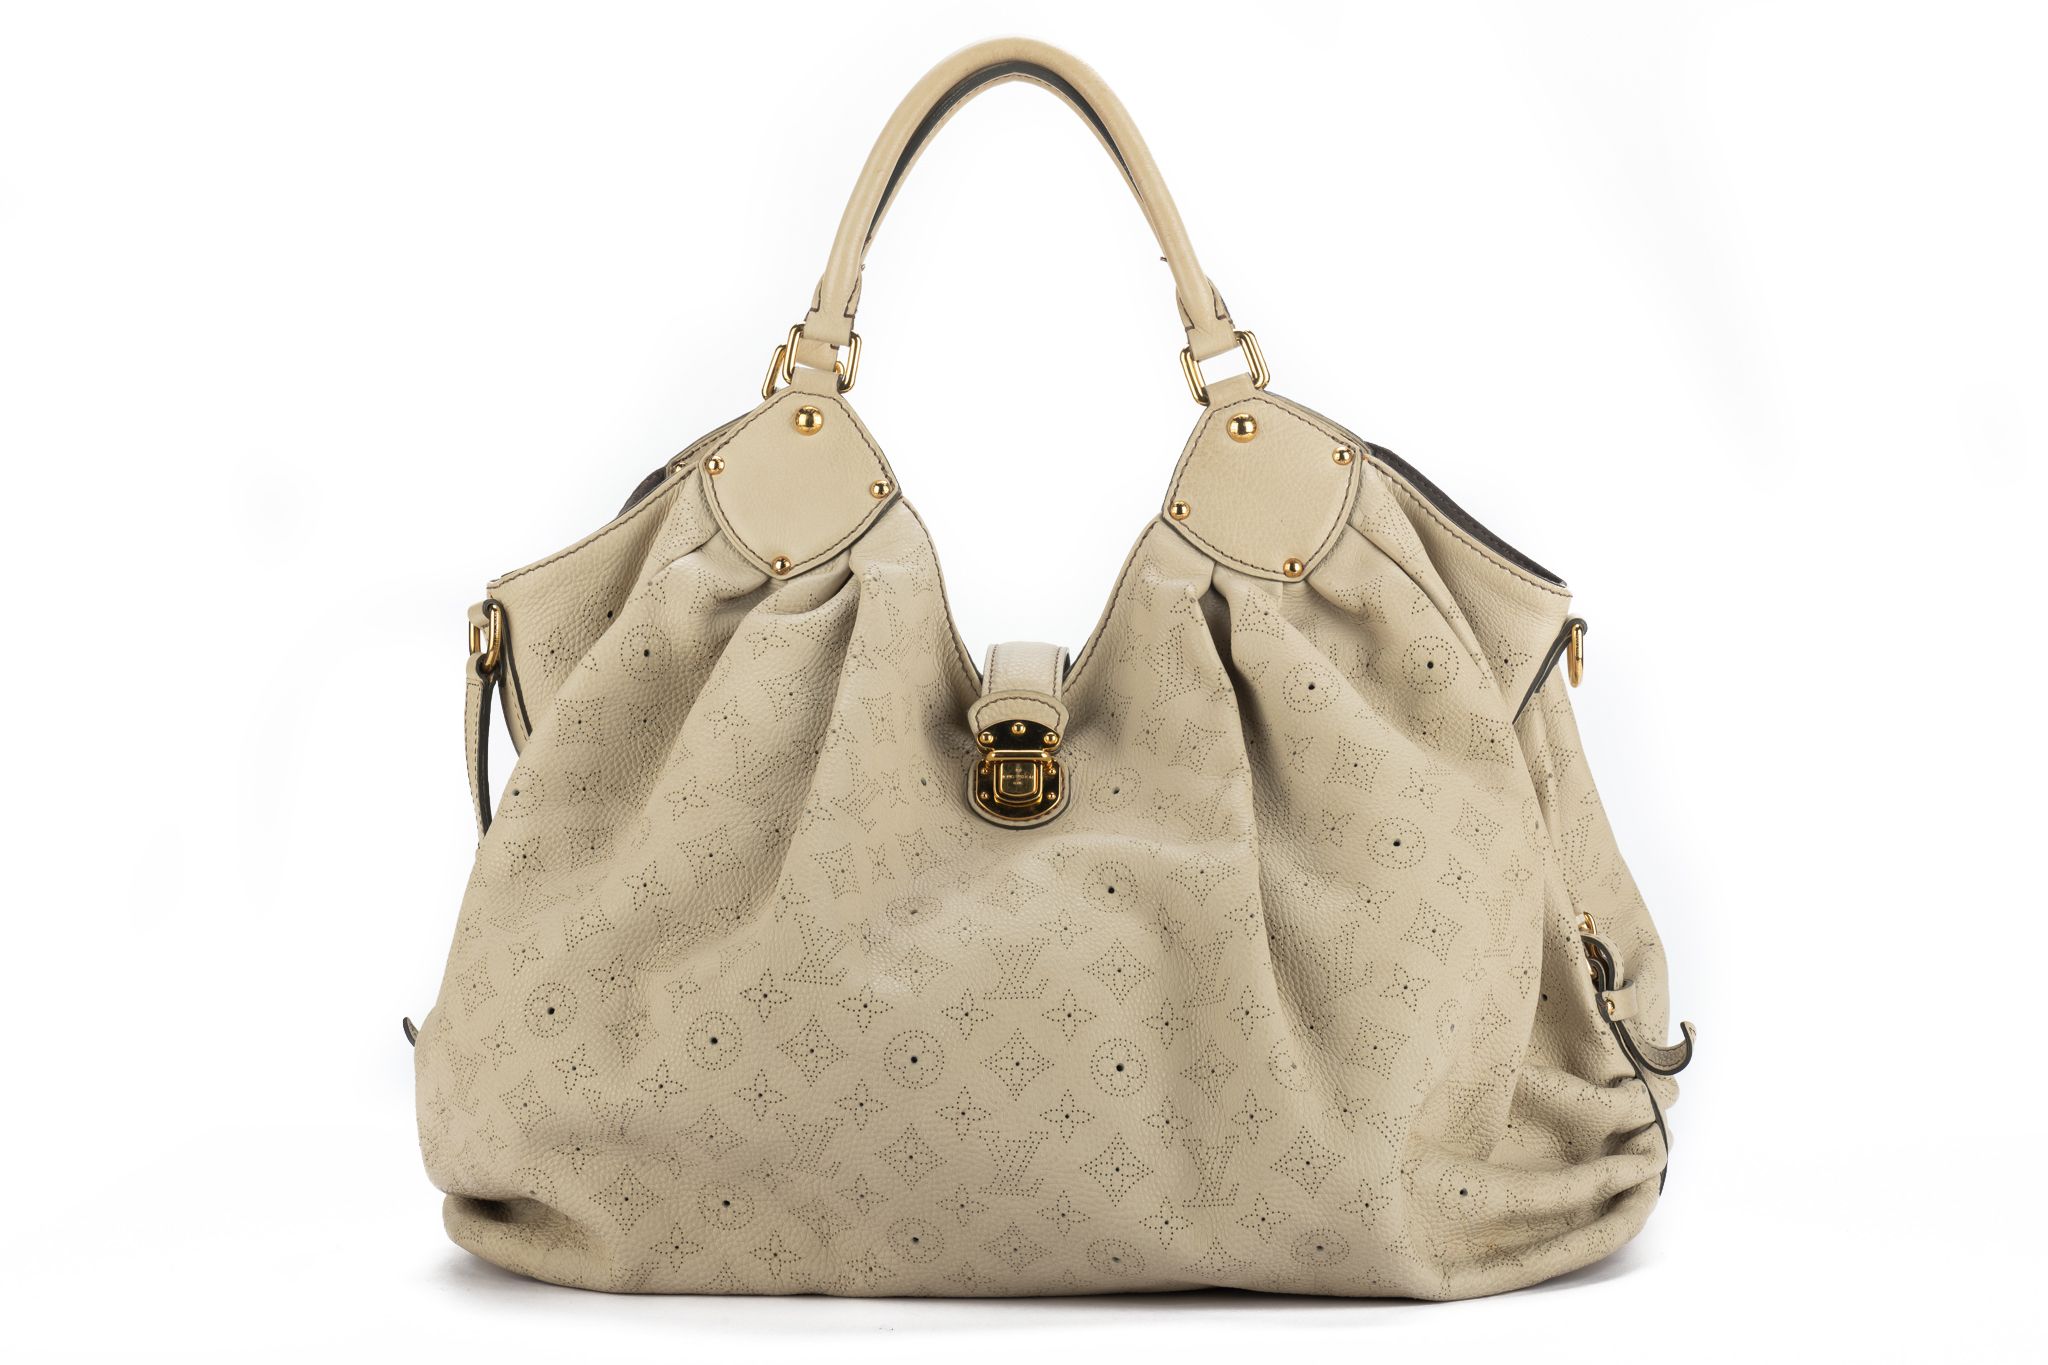 Louis Vuitton - Authenticated Mahina Handbag - Leather Beige for Women, Good Condition